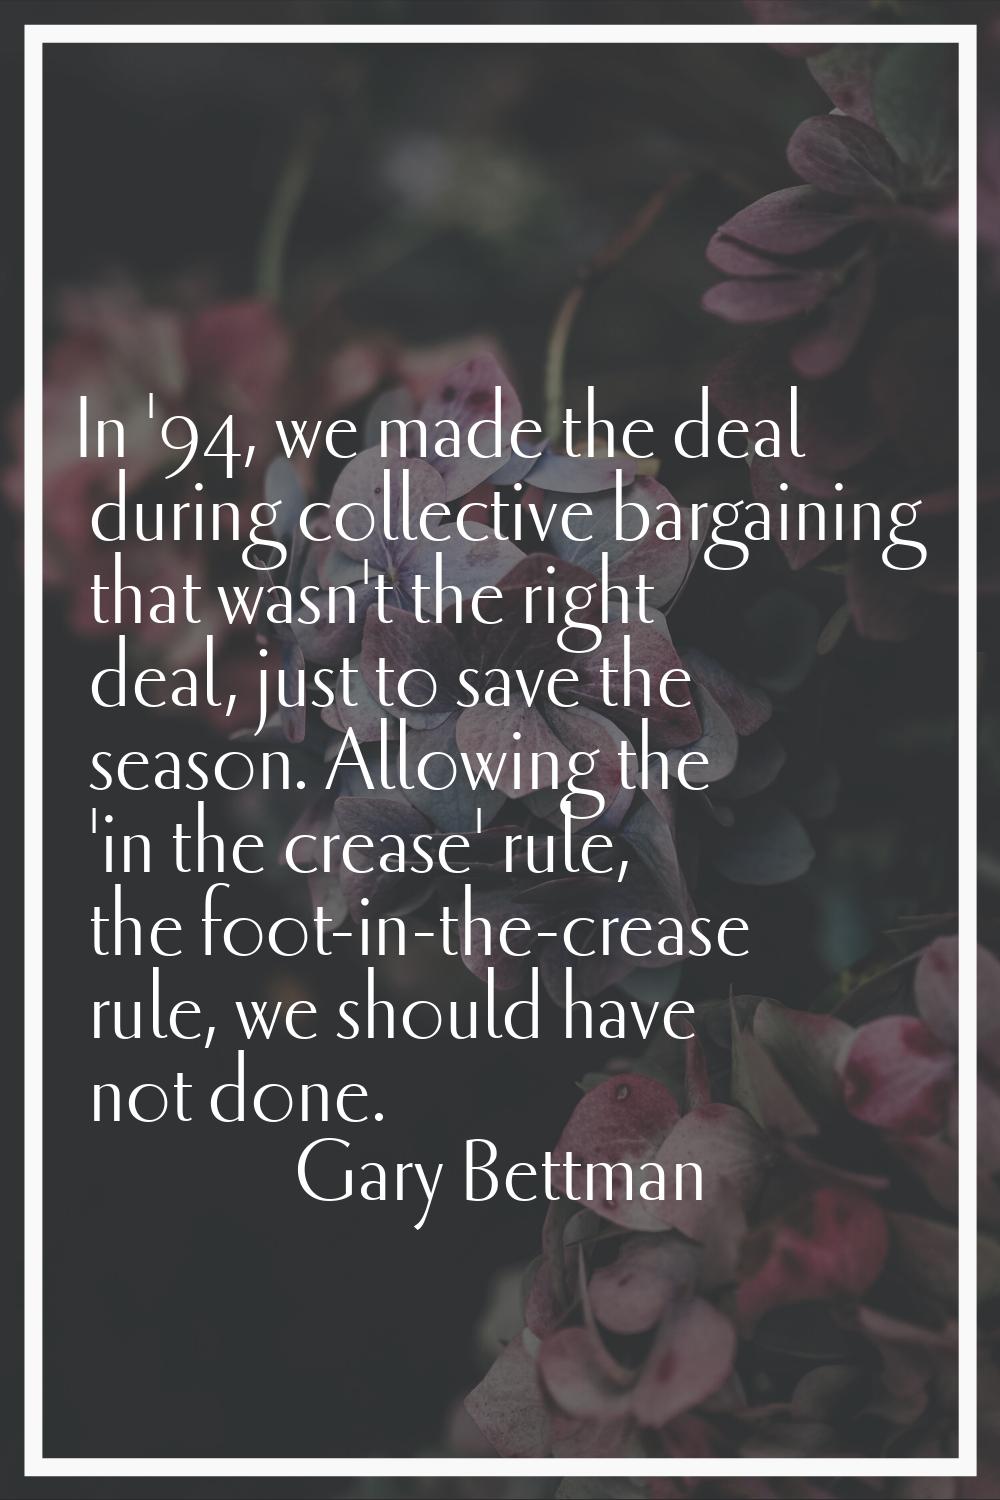 In '94, we made the deal during collective bargaining that wasn't the right deal, just to save the 